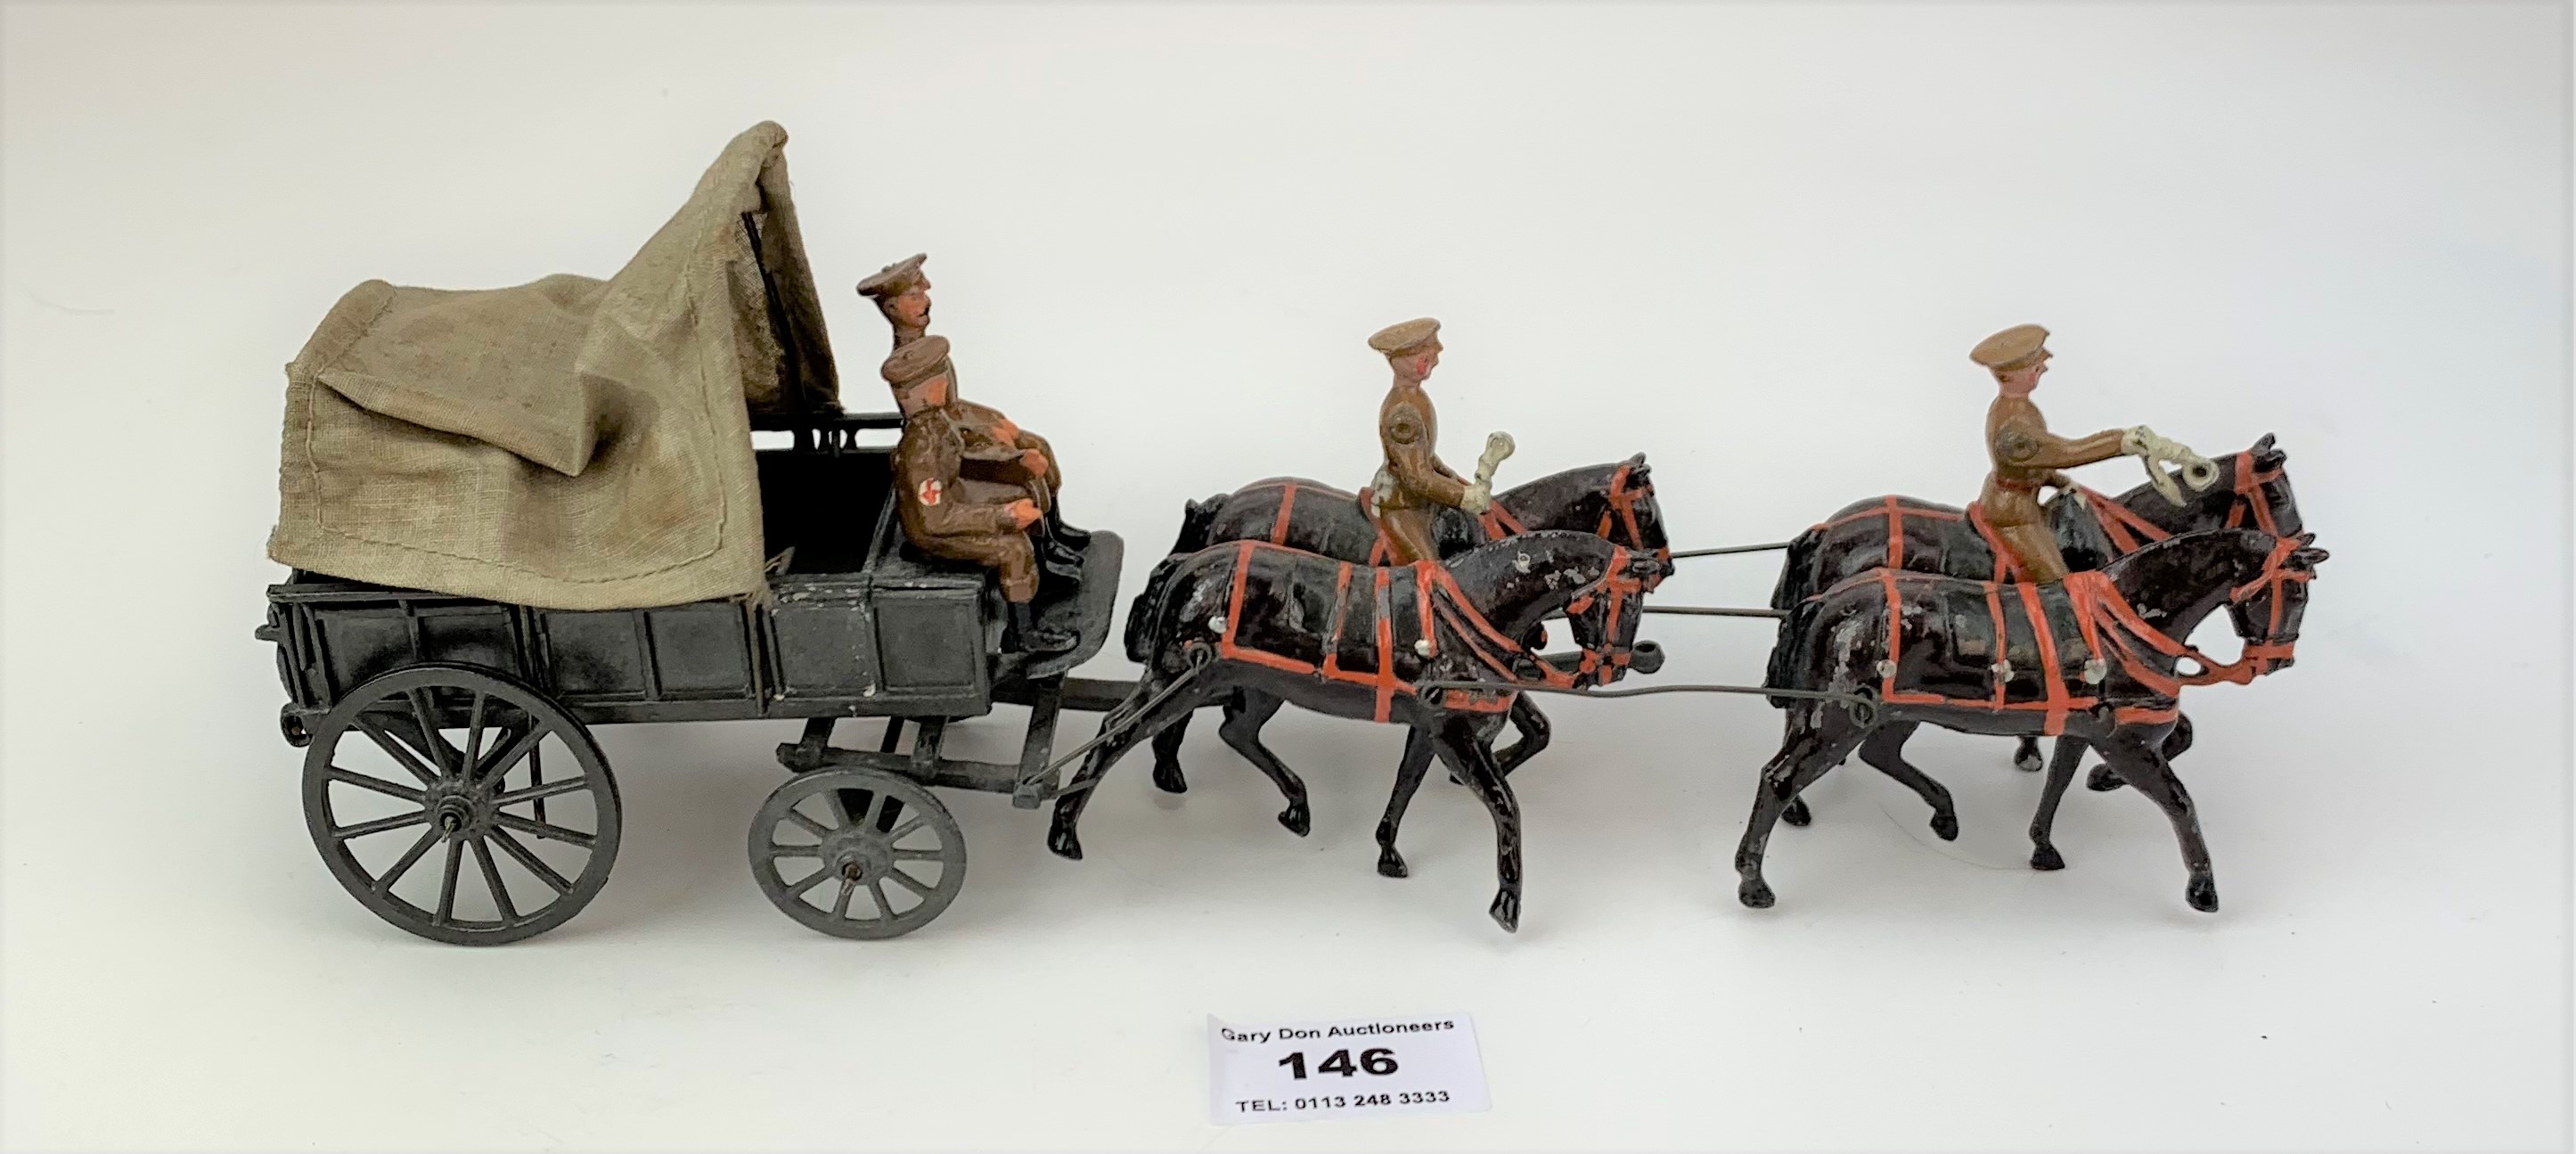 Britains covered military wagon with soldiers and horses